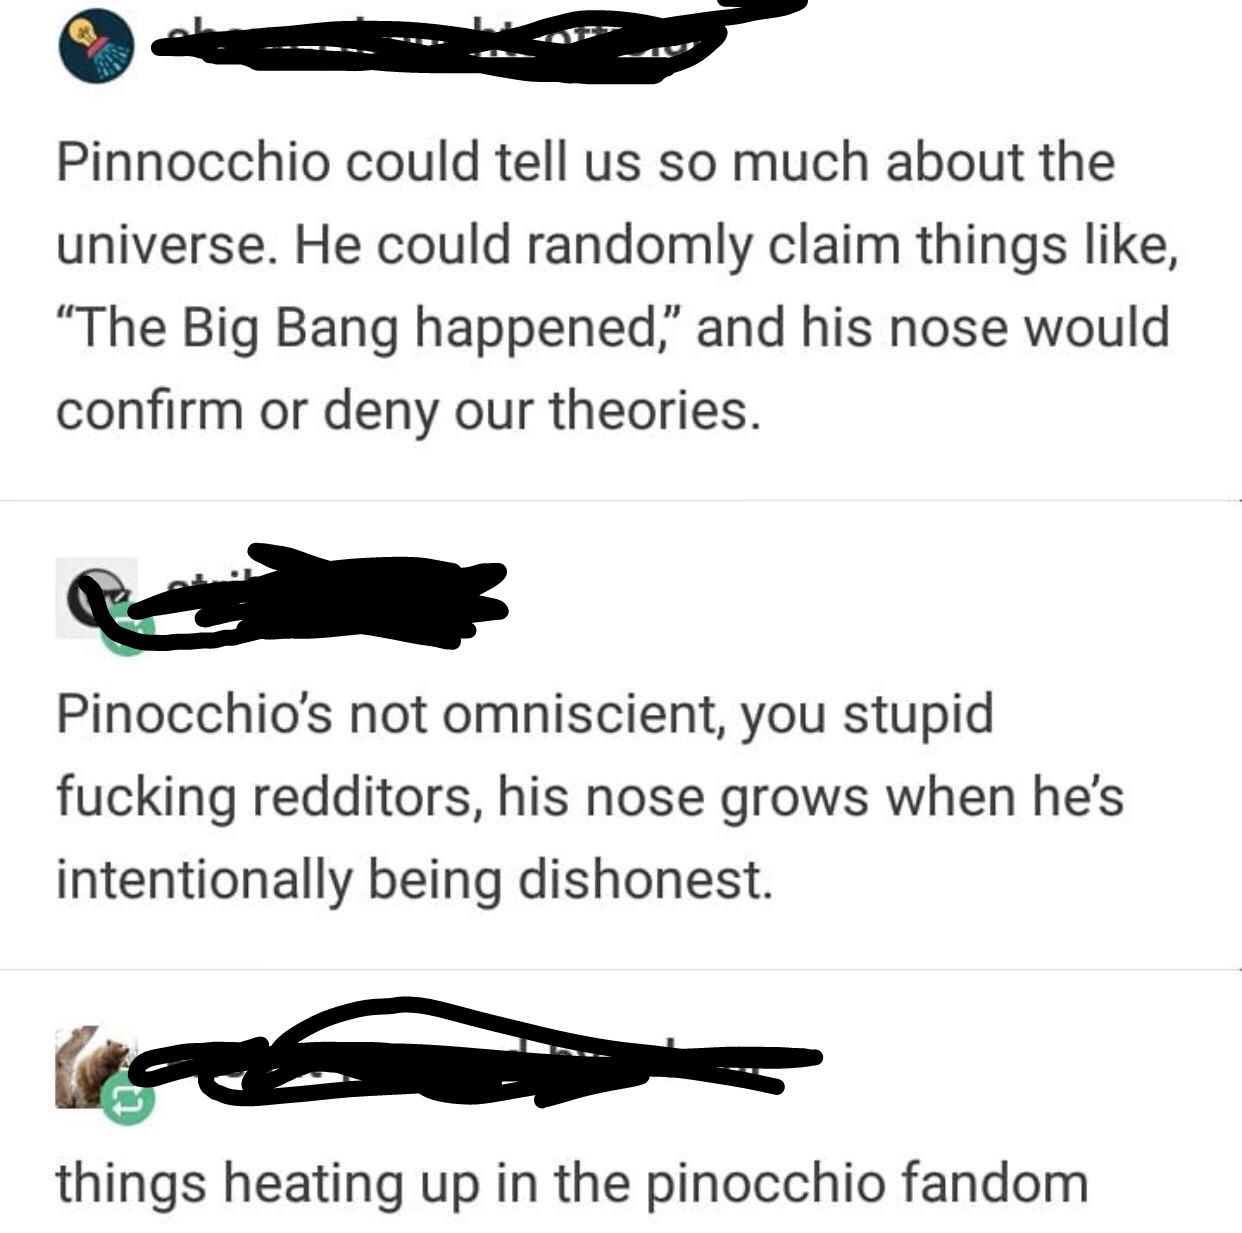 animal - Pinnocchio could tell us so much about the universe. He could randomly claim things , The Big Bang happened," and his nose would confirm or deny our theories. Pinocchio's not omniscient, you stupid fucking redditors, his nose grows when he's inte